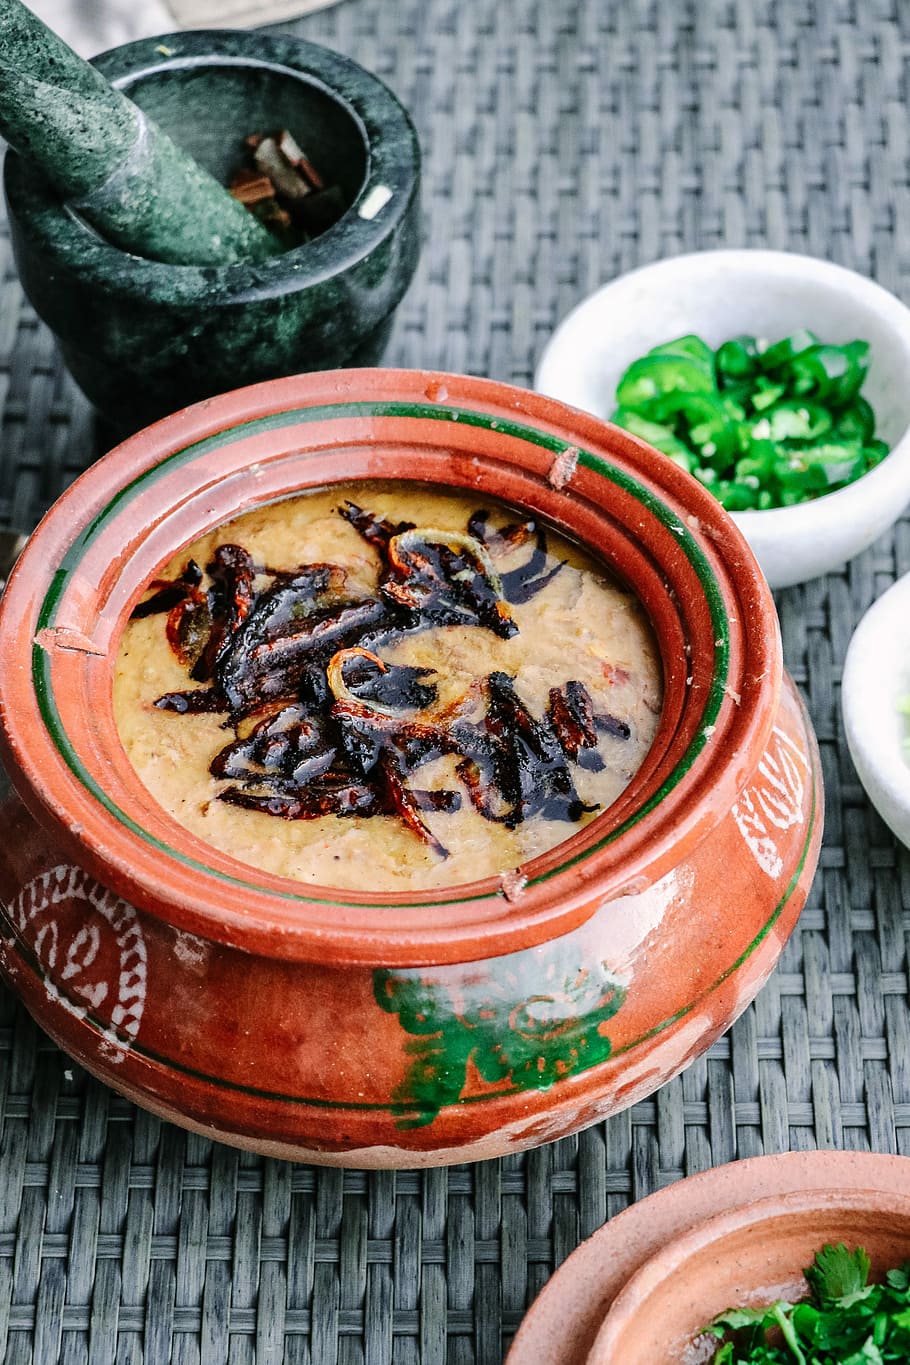 Haleem, brown clay pot with food, stew, chilli, meal, peppers